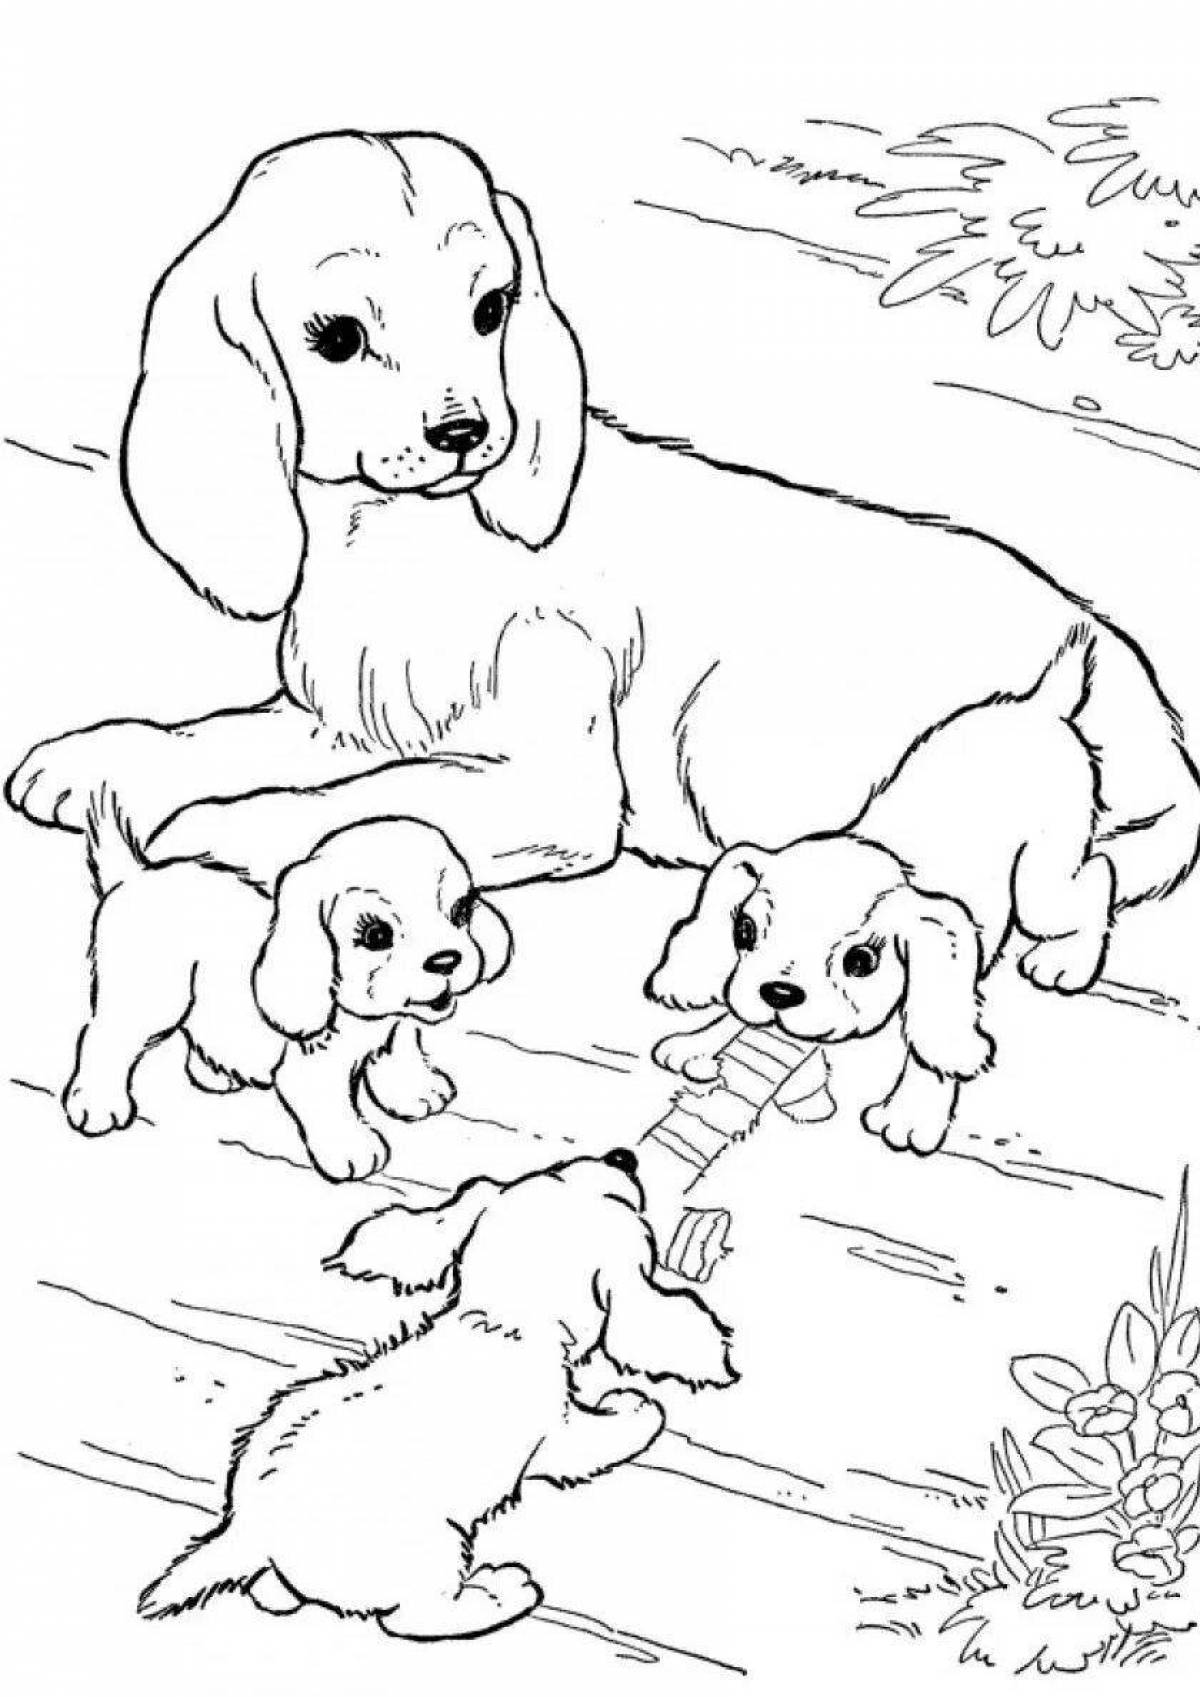 Coloring dog for children 5-6 years old